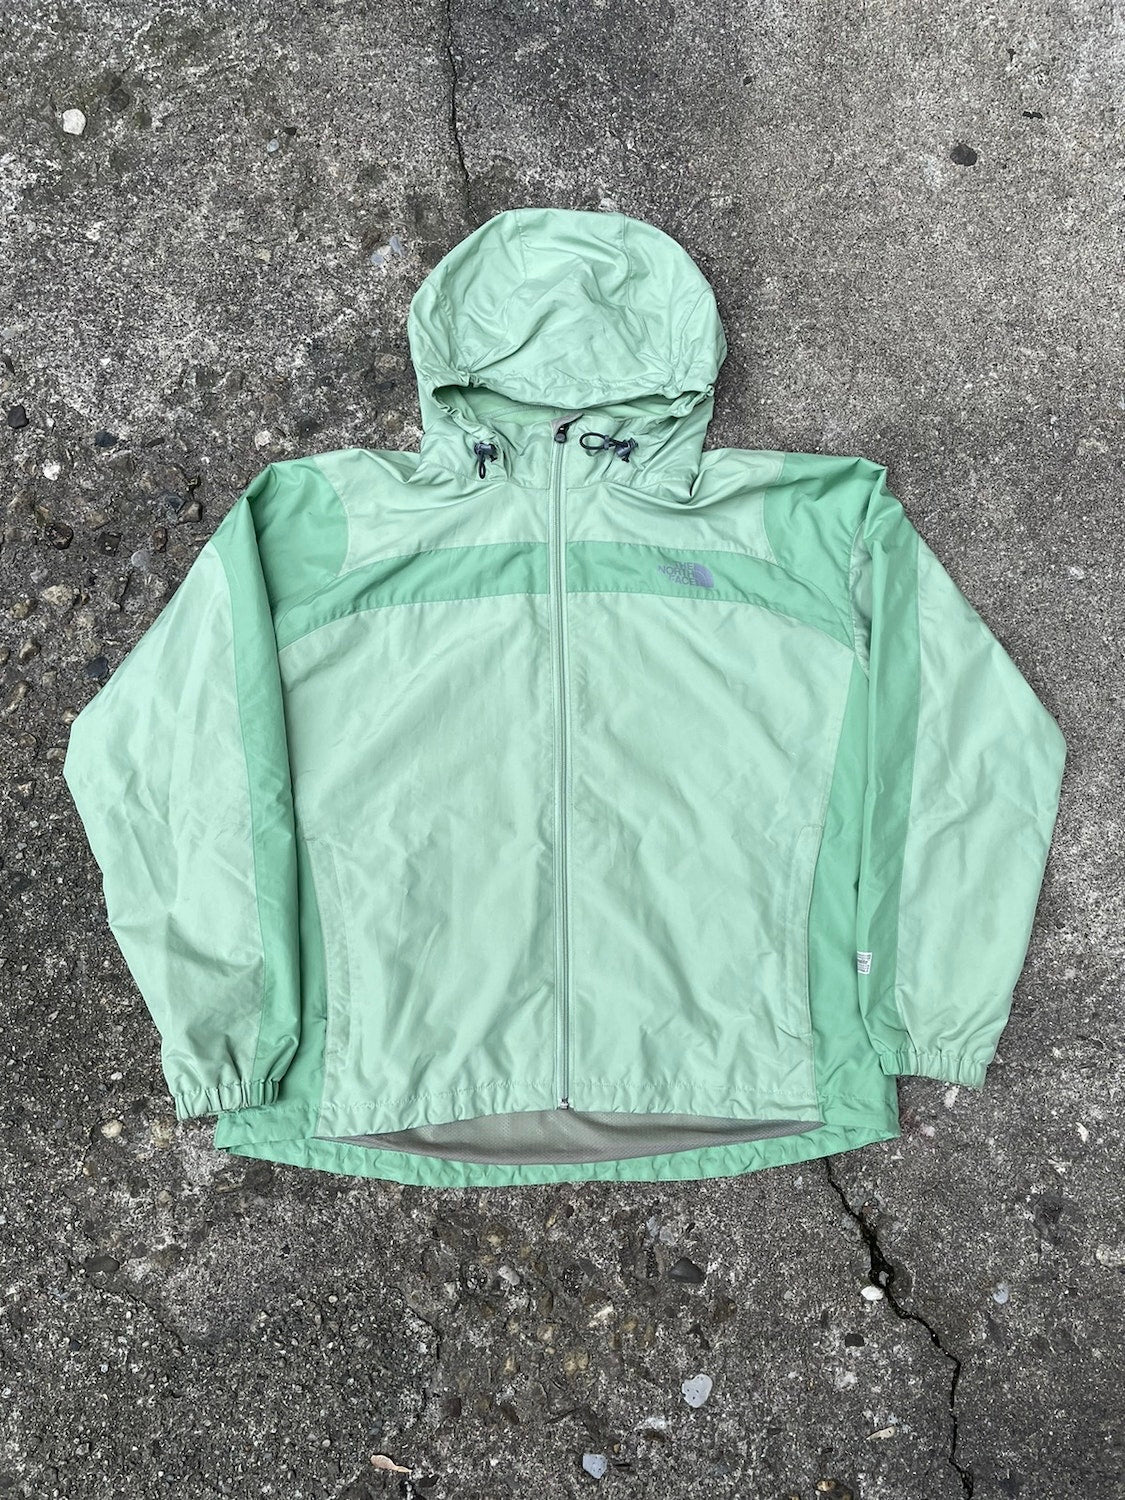 2000’s The North Face Hydrenalite Shell Jacket - L